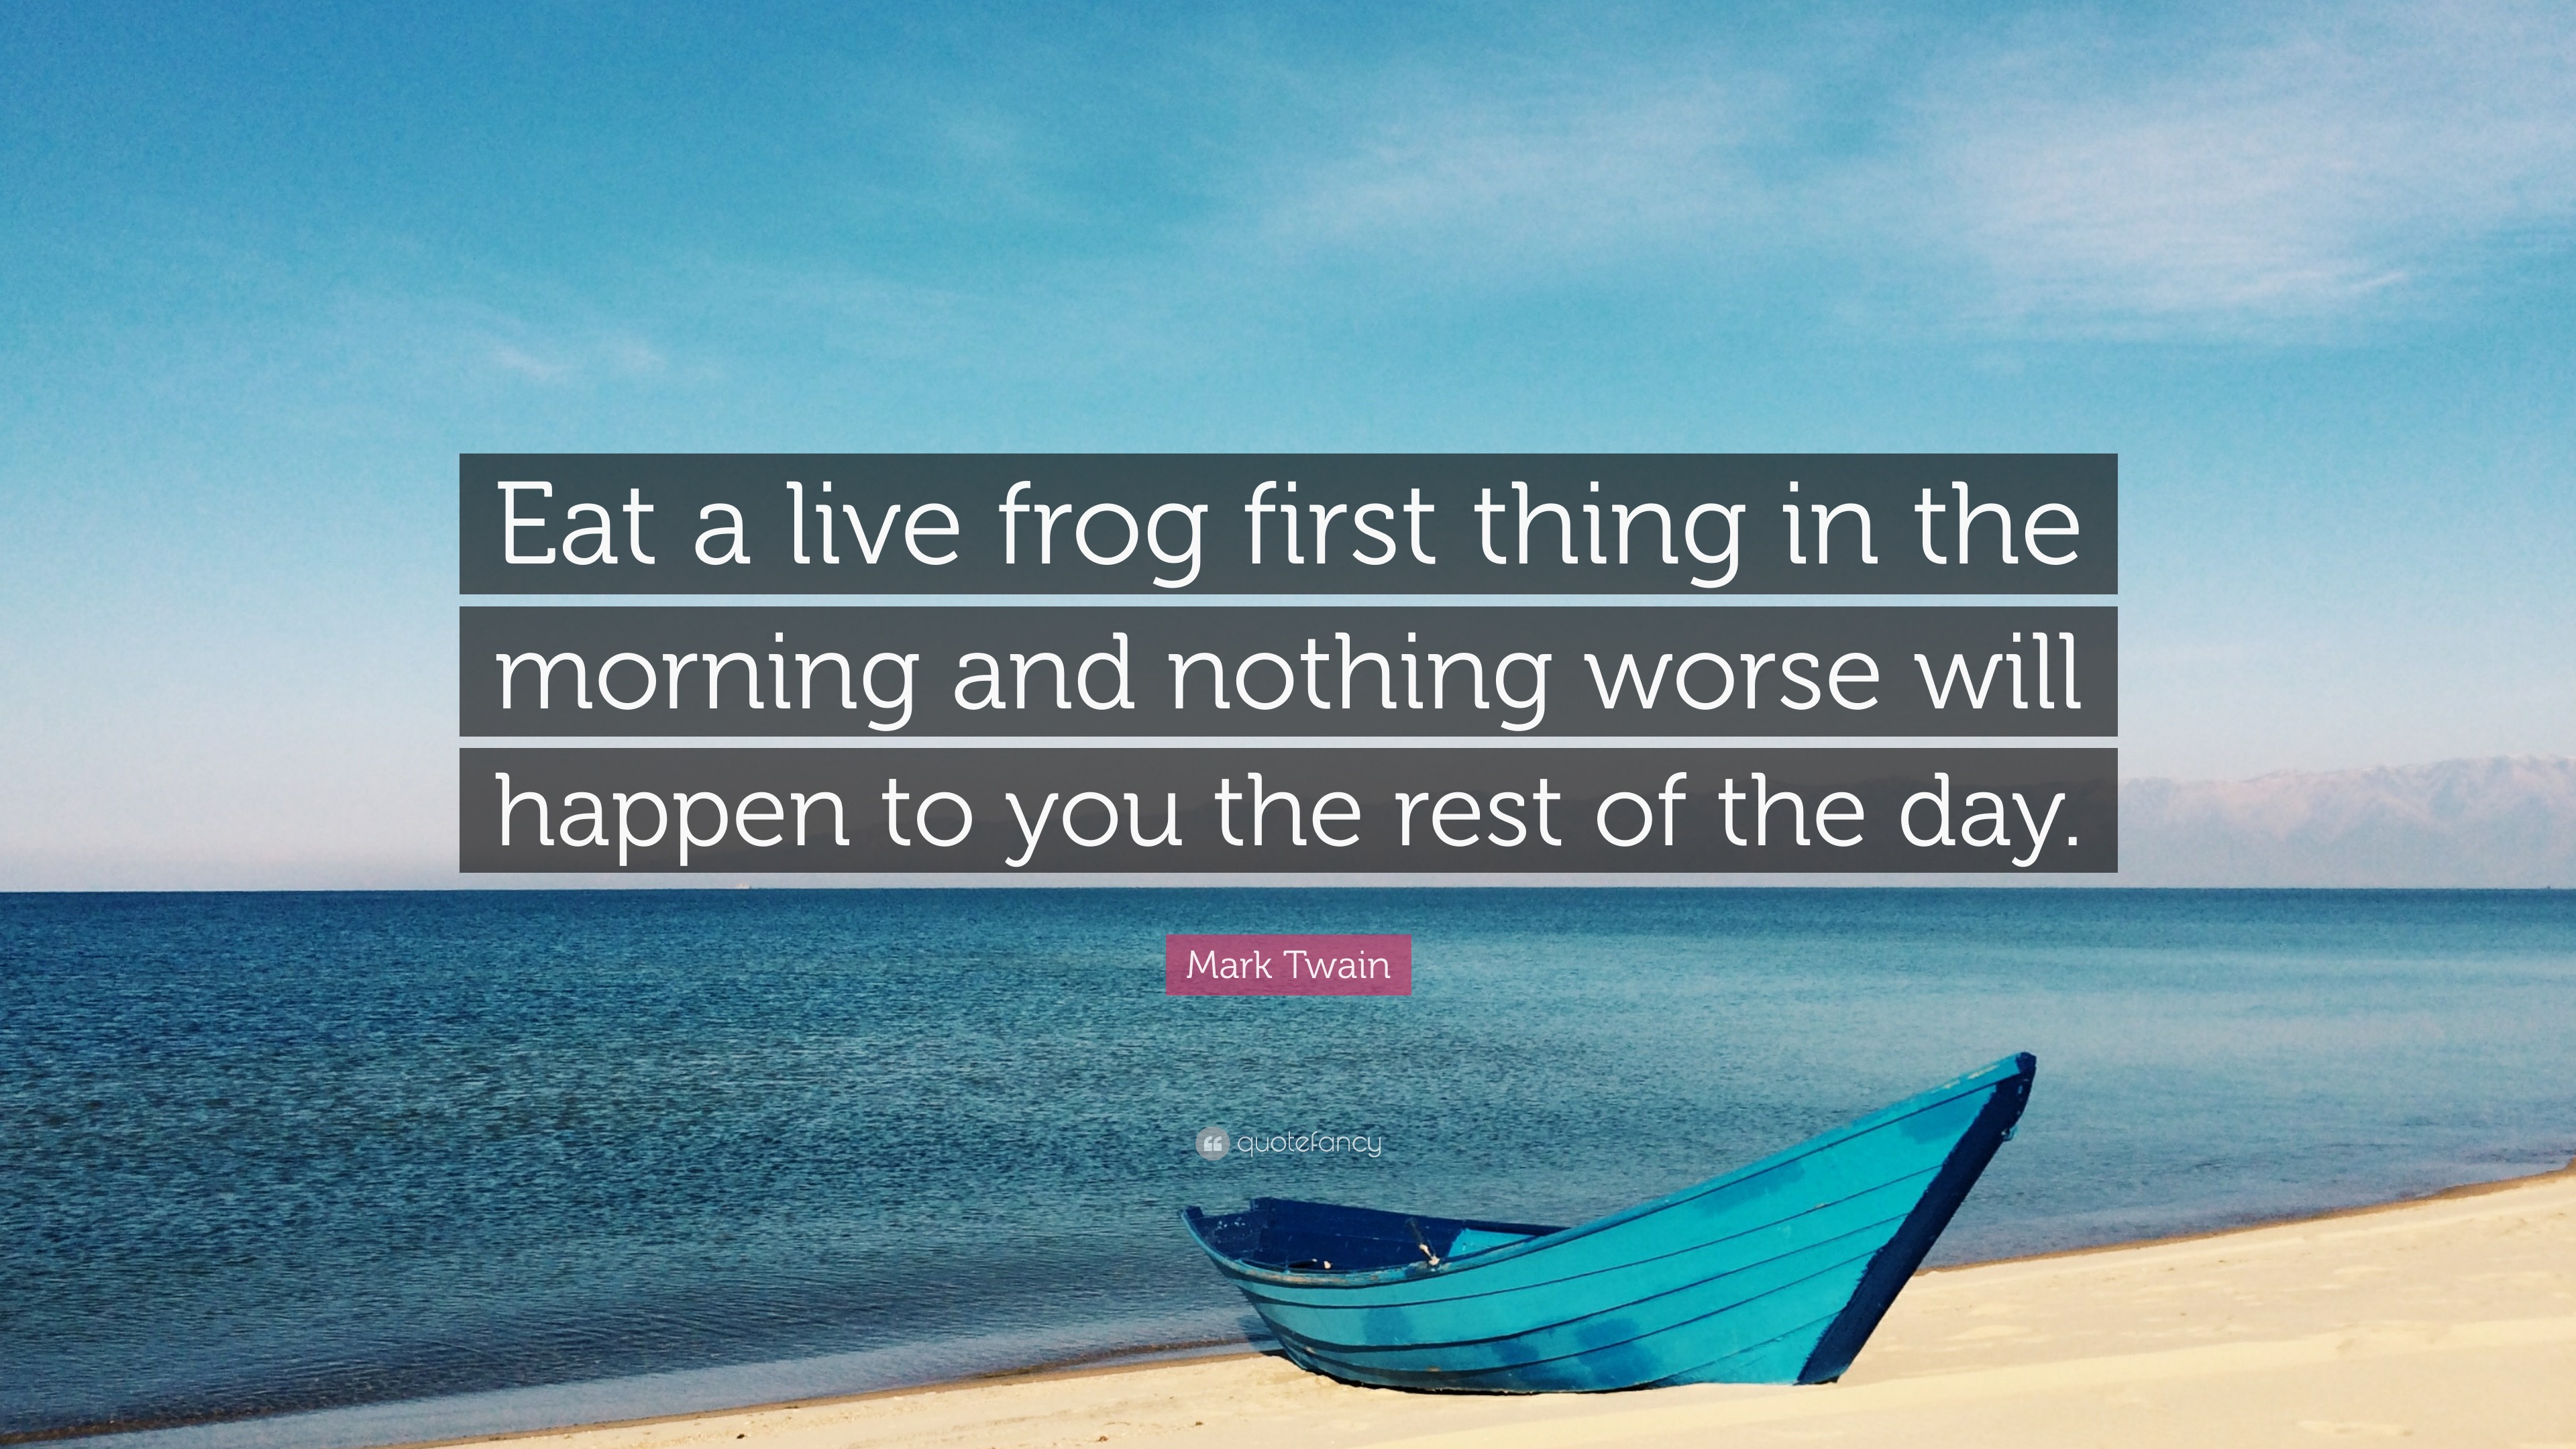 Mark Twain Quote: “Eat a live frog first thing in the morning and